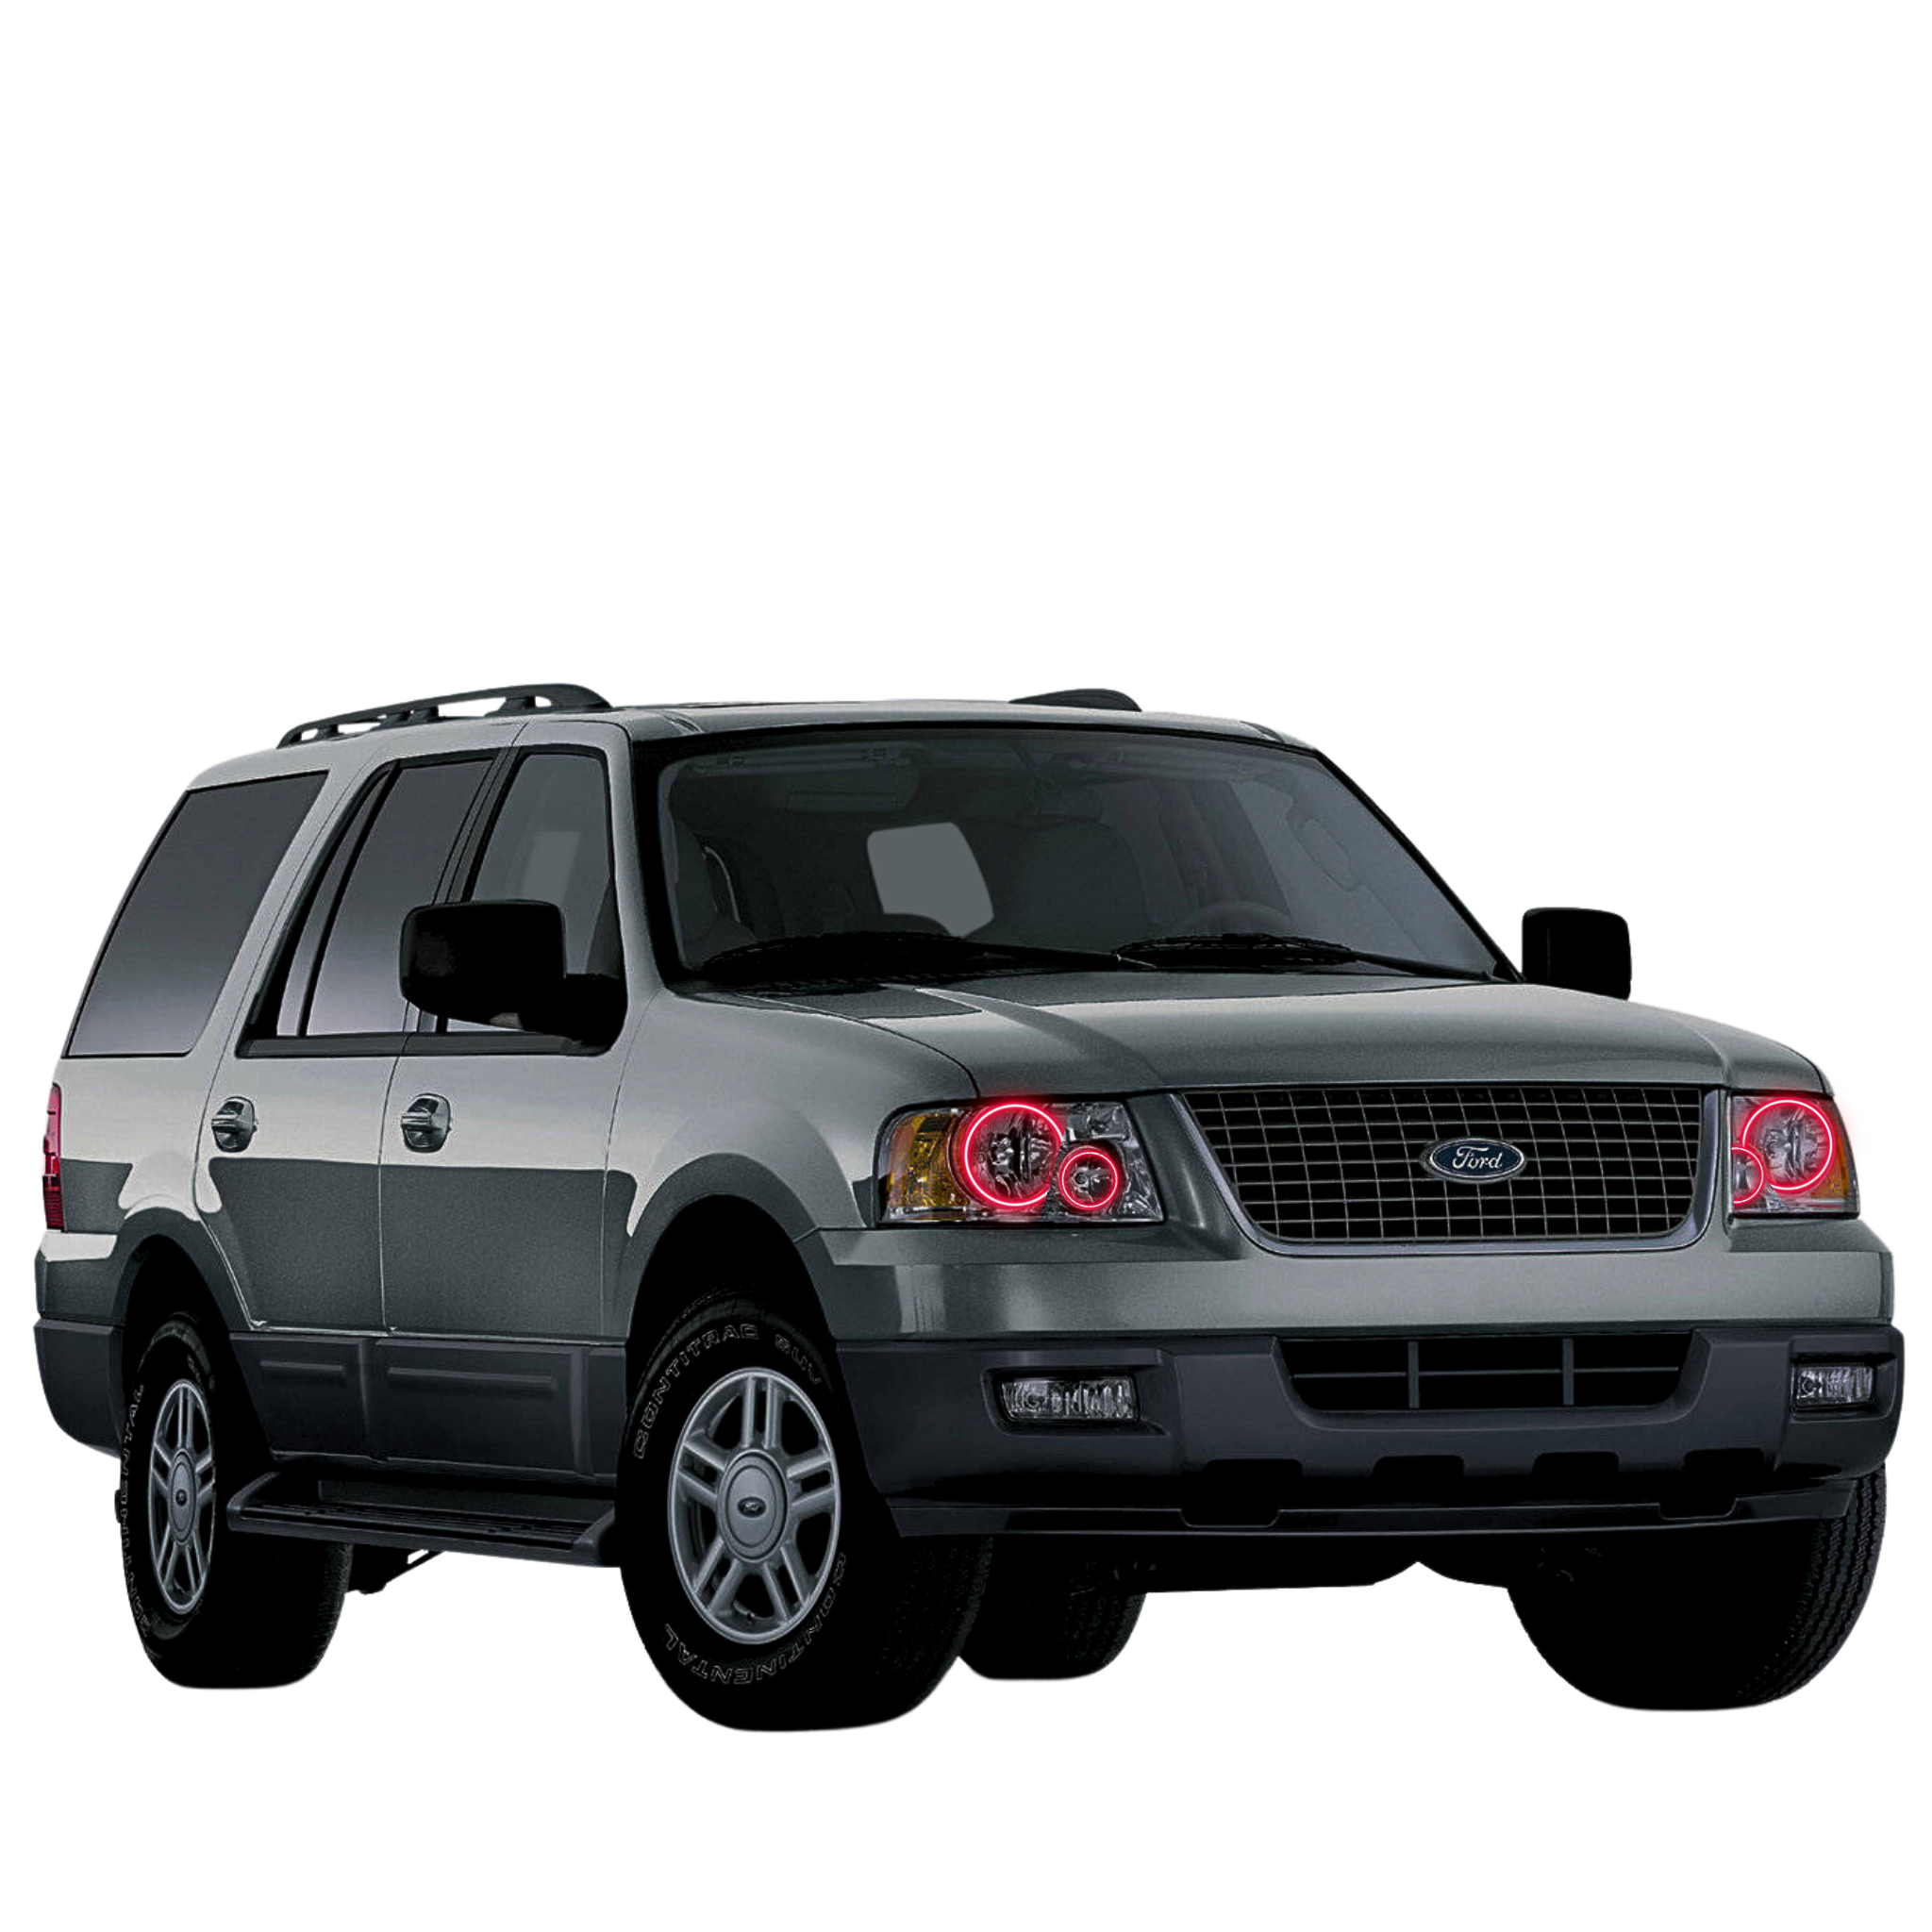 Ford Expedition Multicolor Halo Kit (2003-2006)